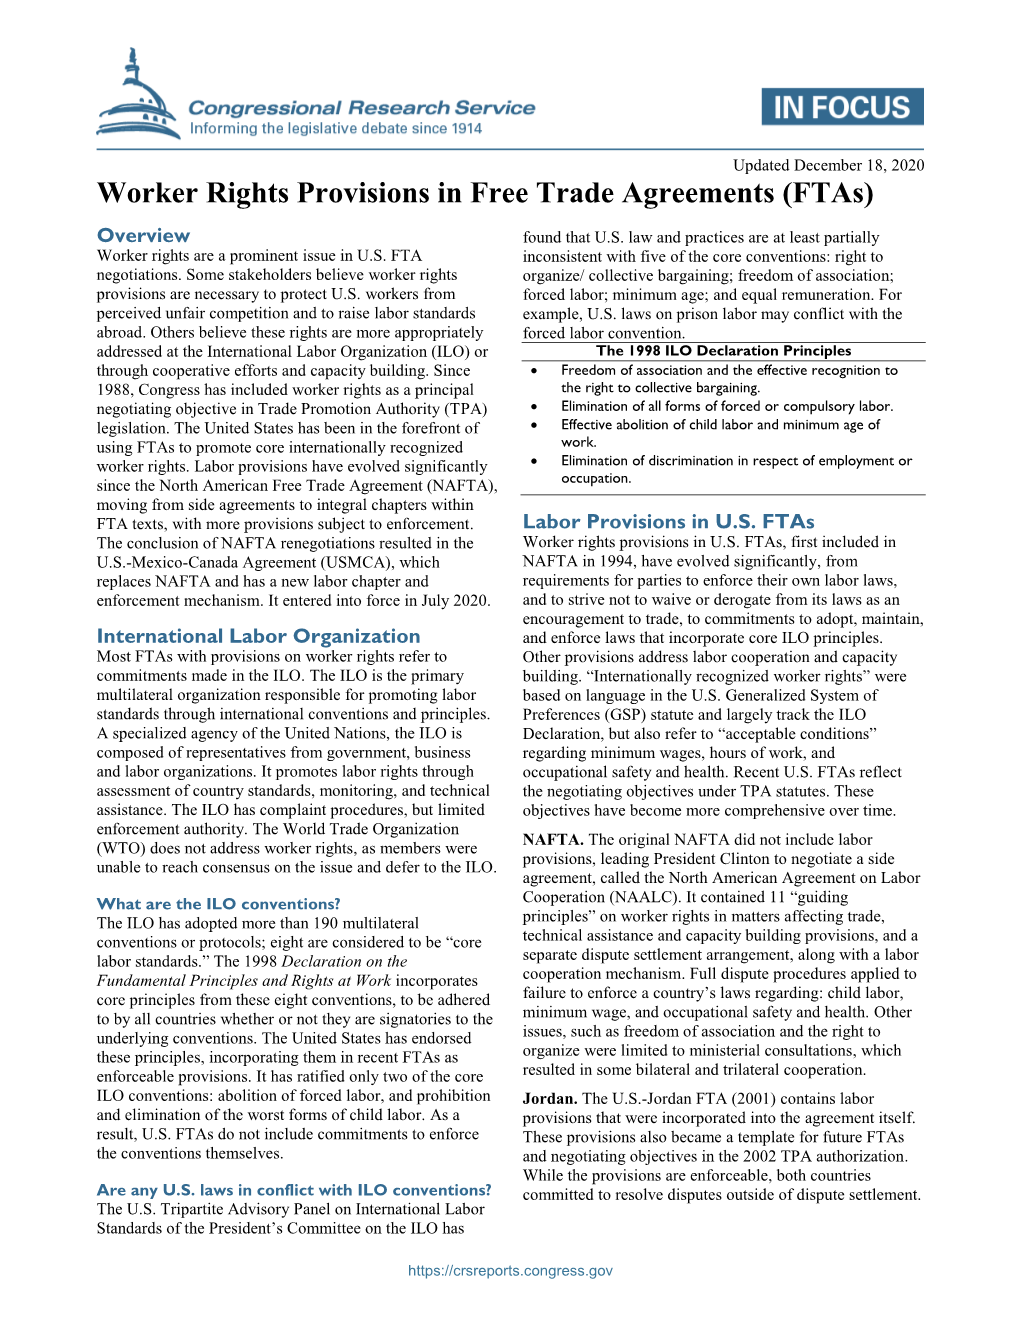 Worker Rights Provisions in Free Trade Agreements (Ftas)